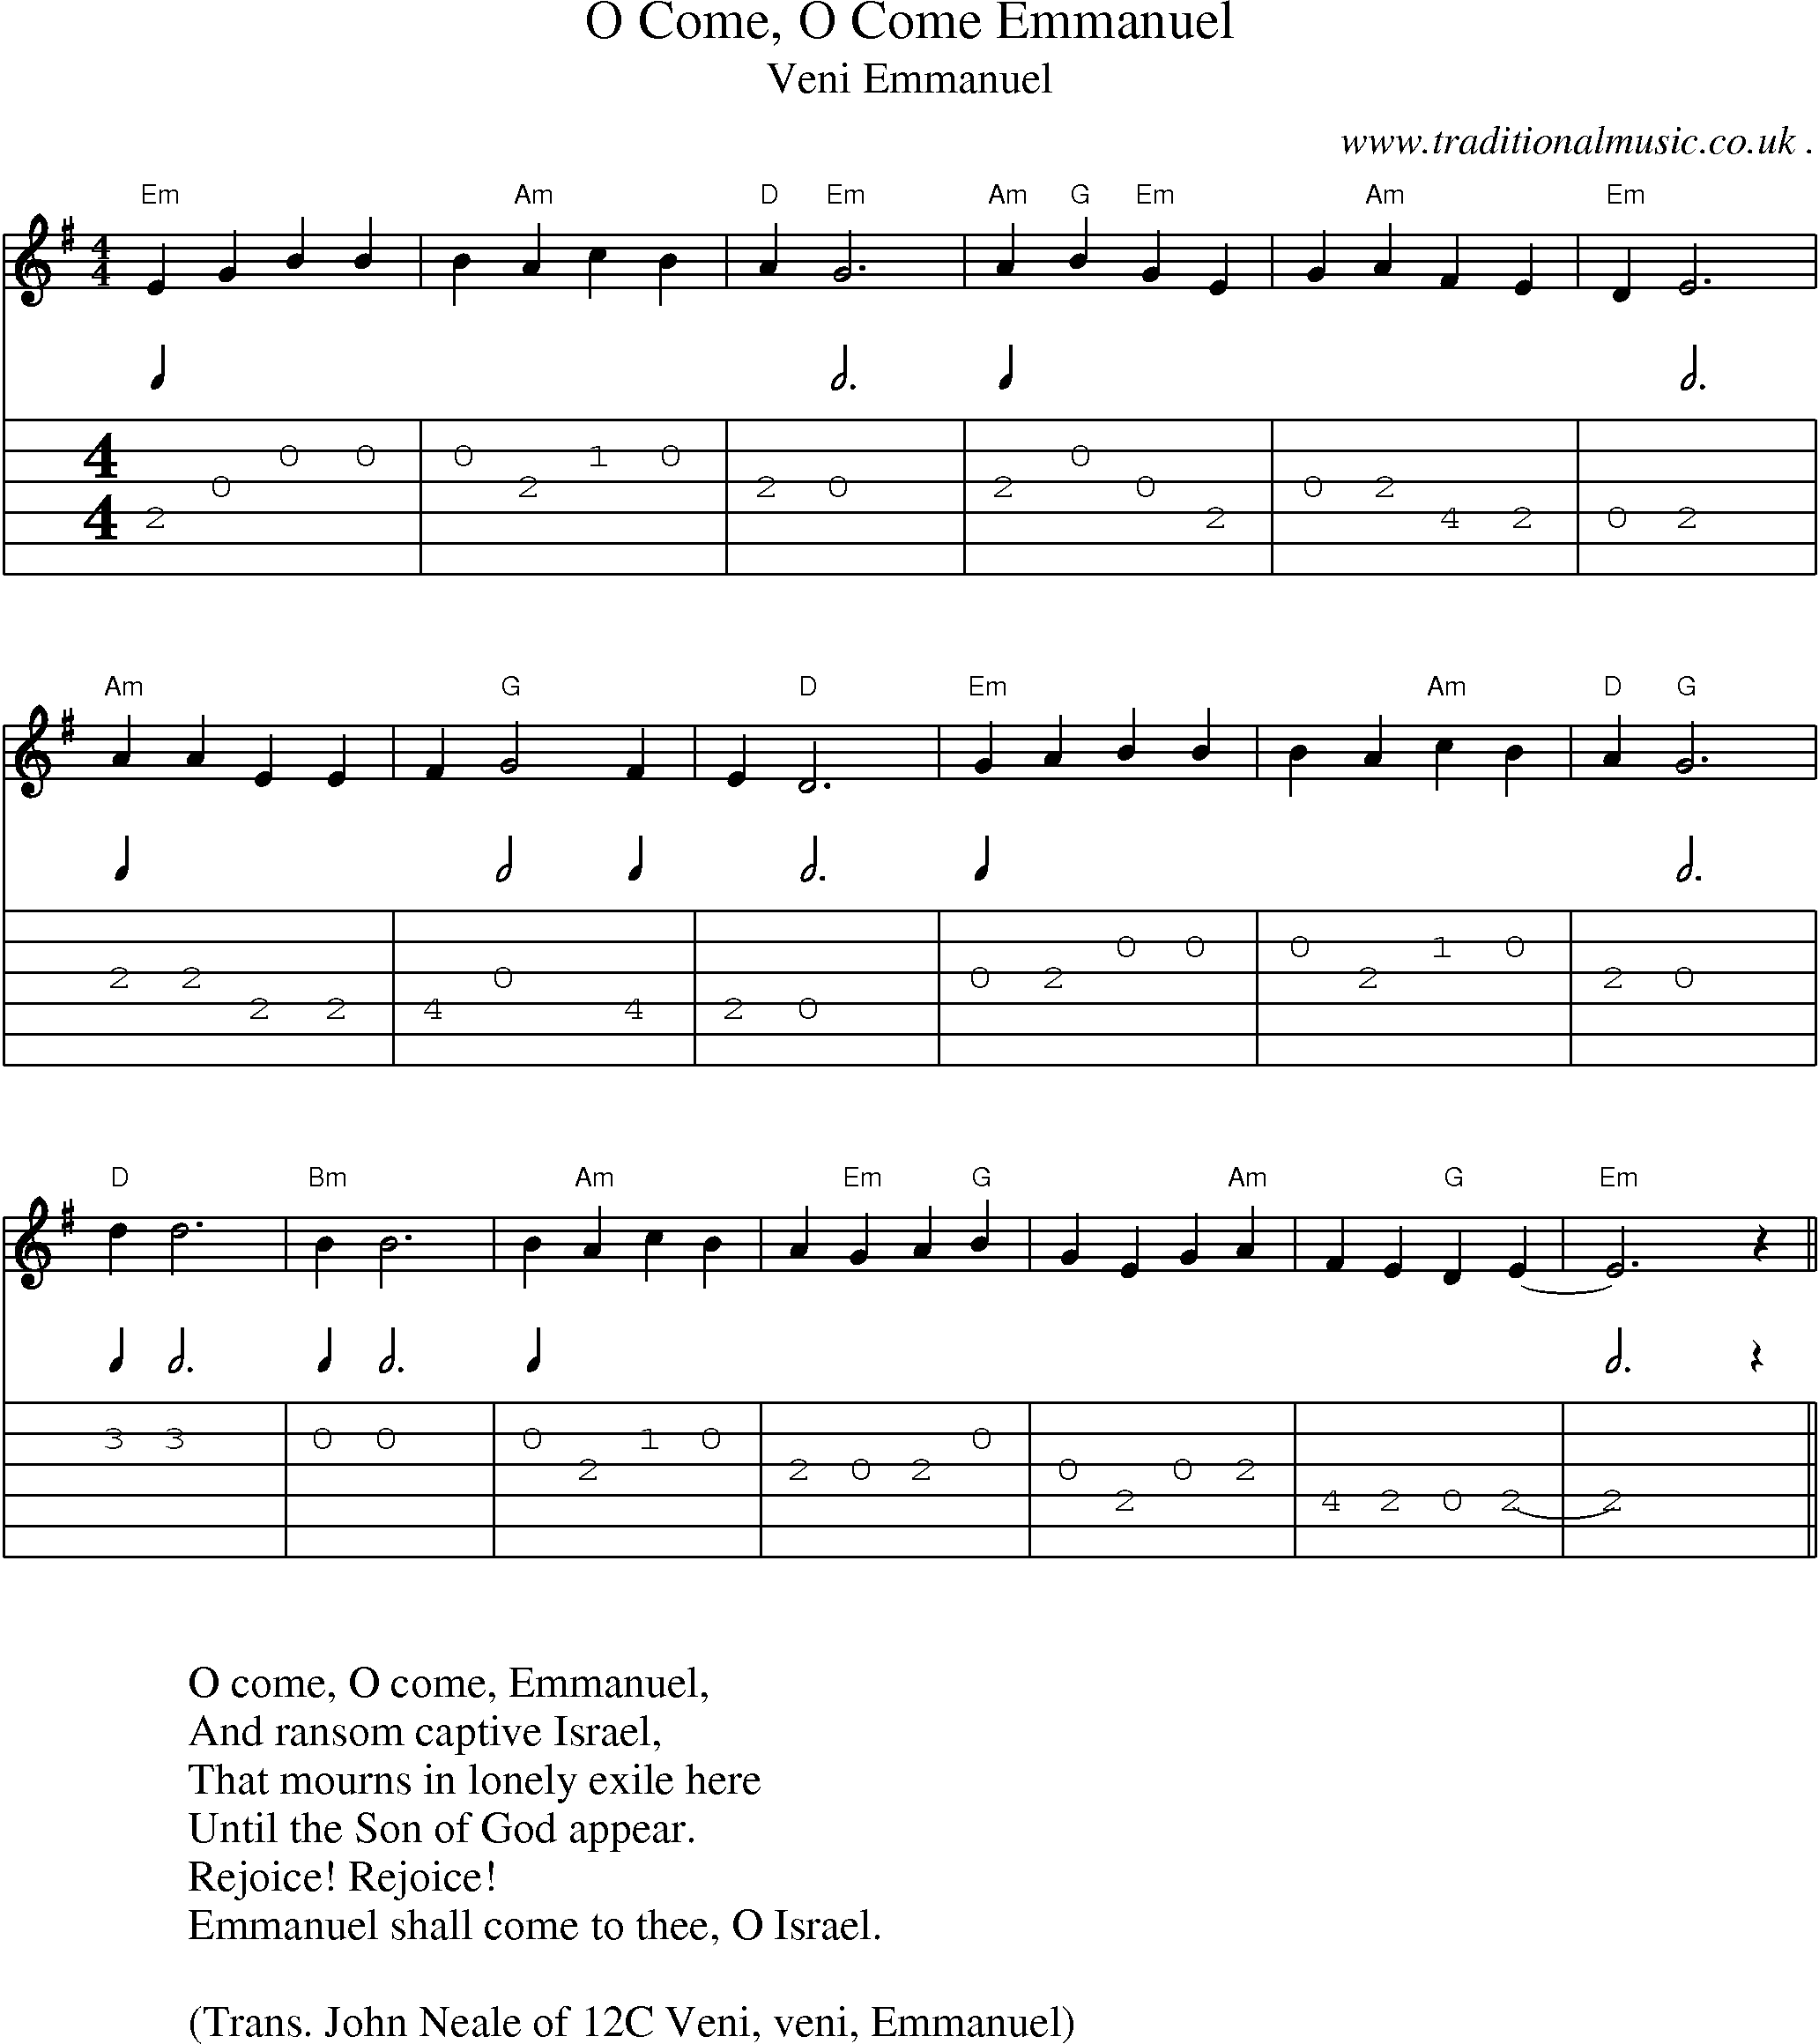 Music Score and Guitar Tabs for O Come O Come Emmanuel